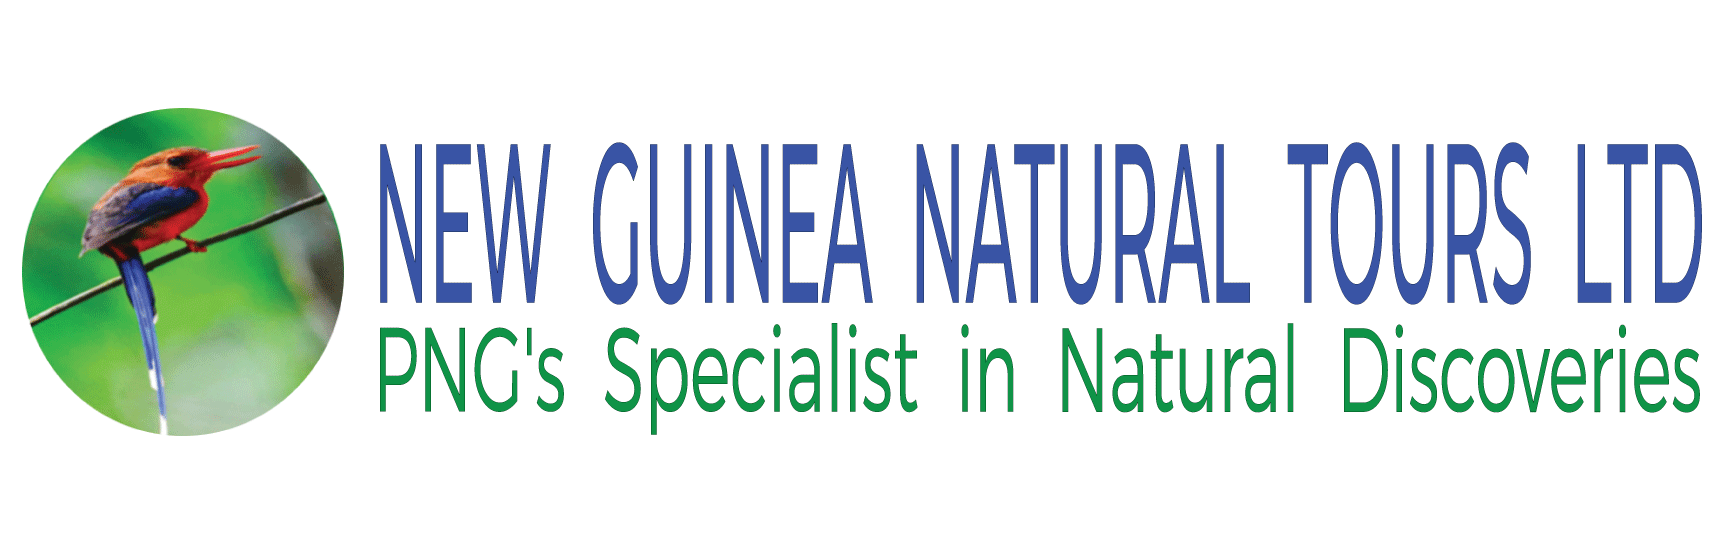 New Guinea Natural Tours